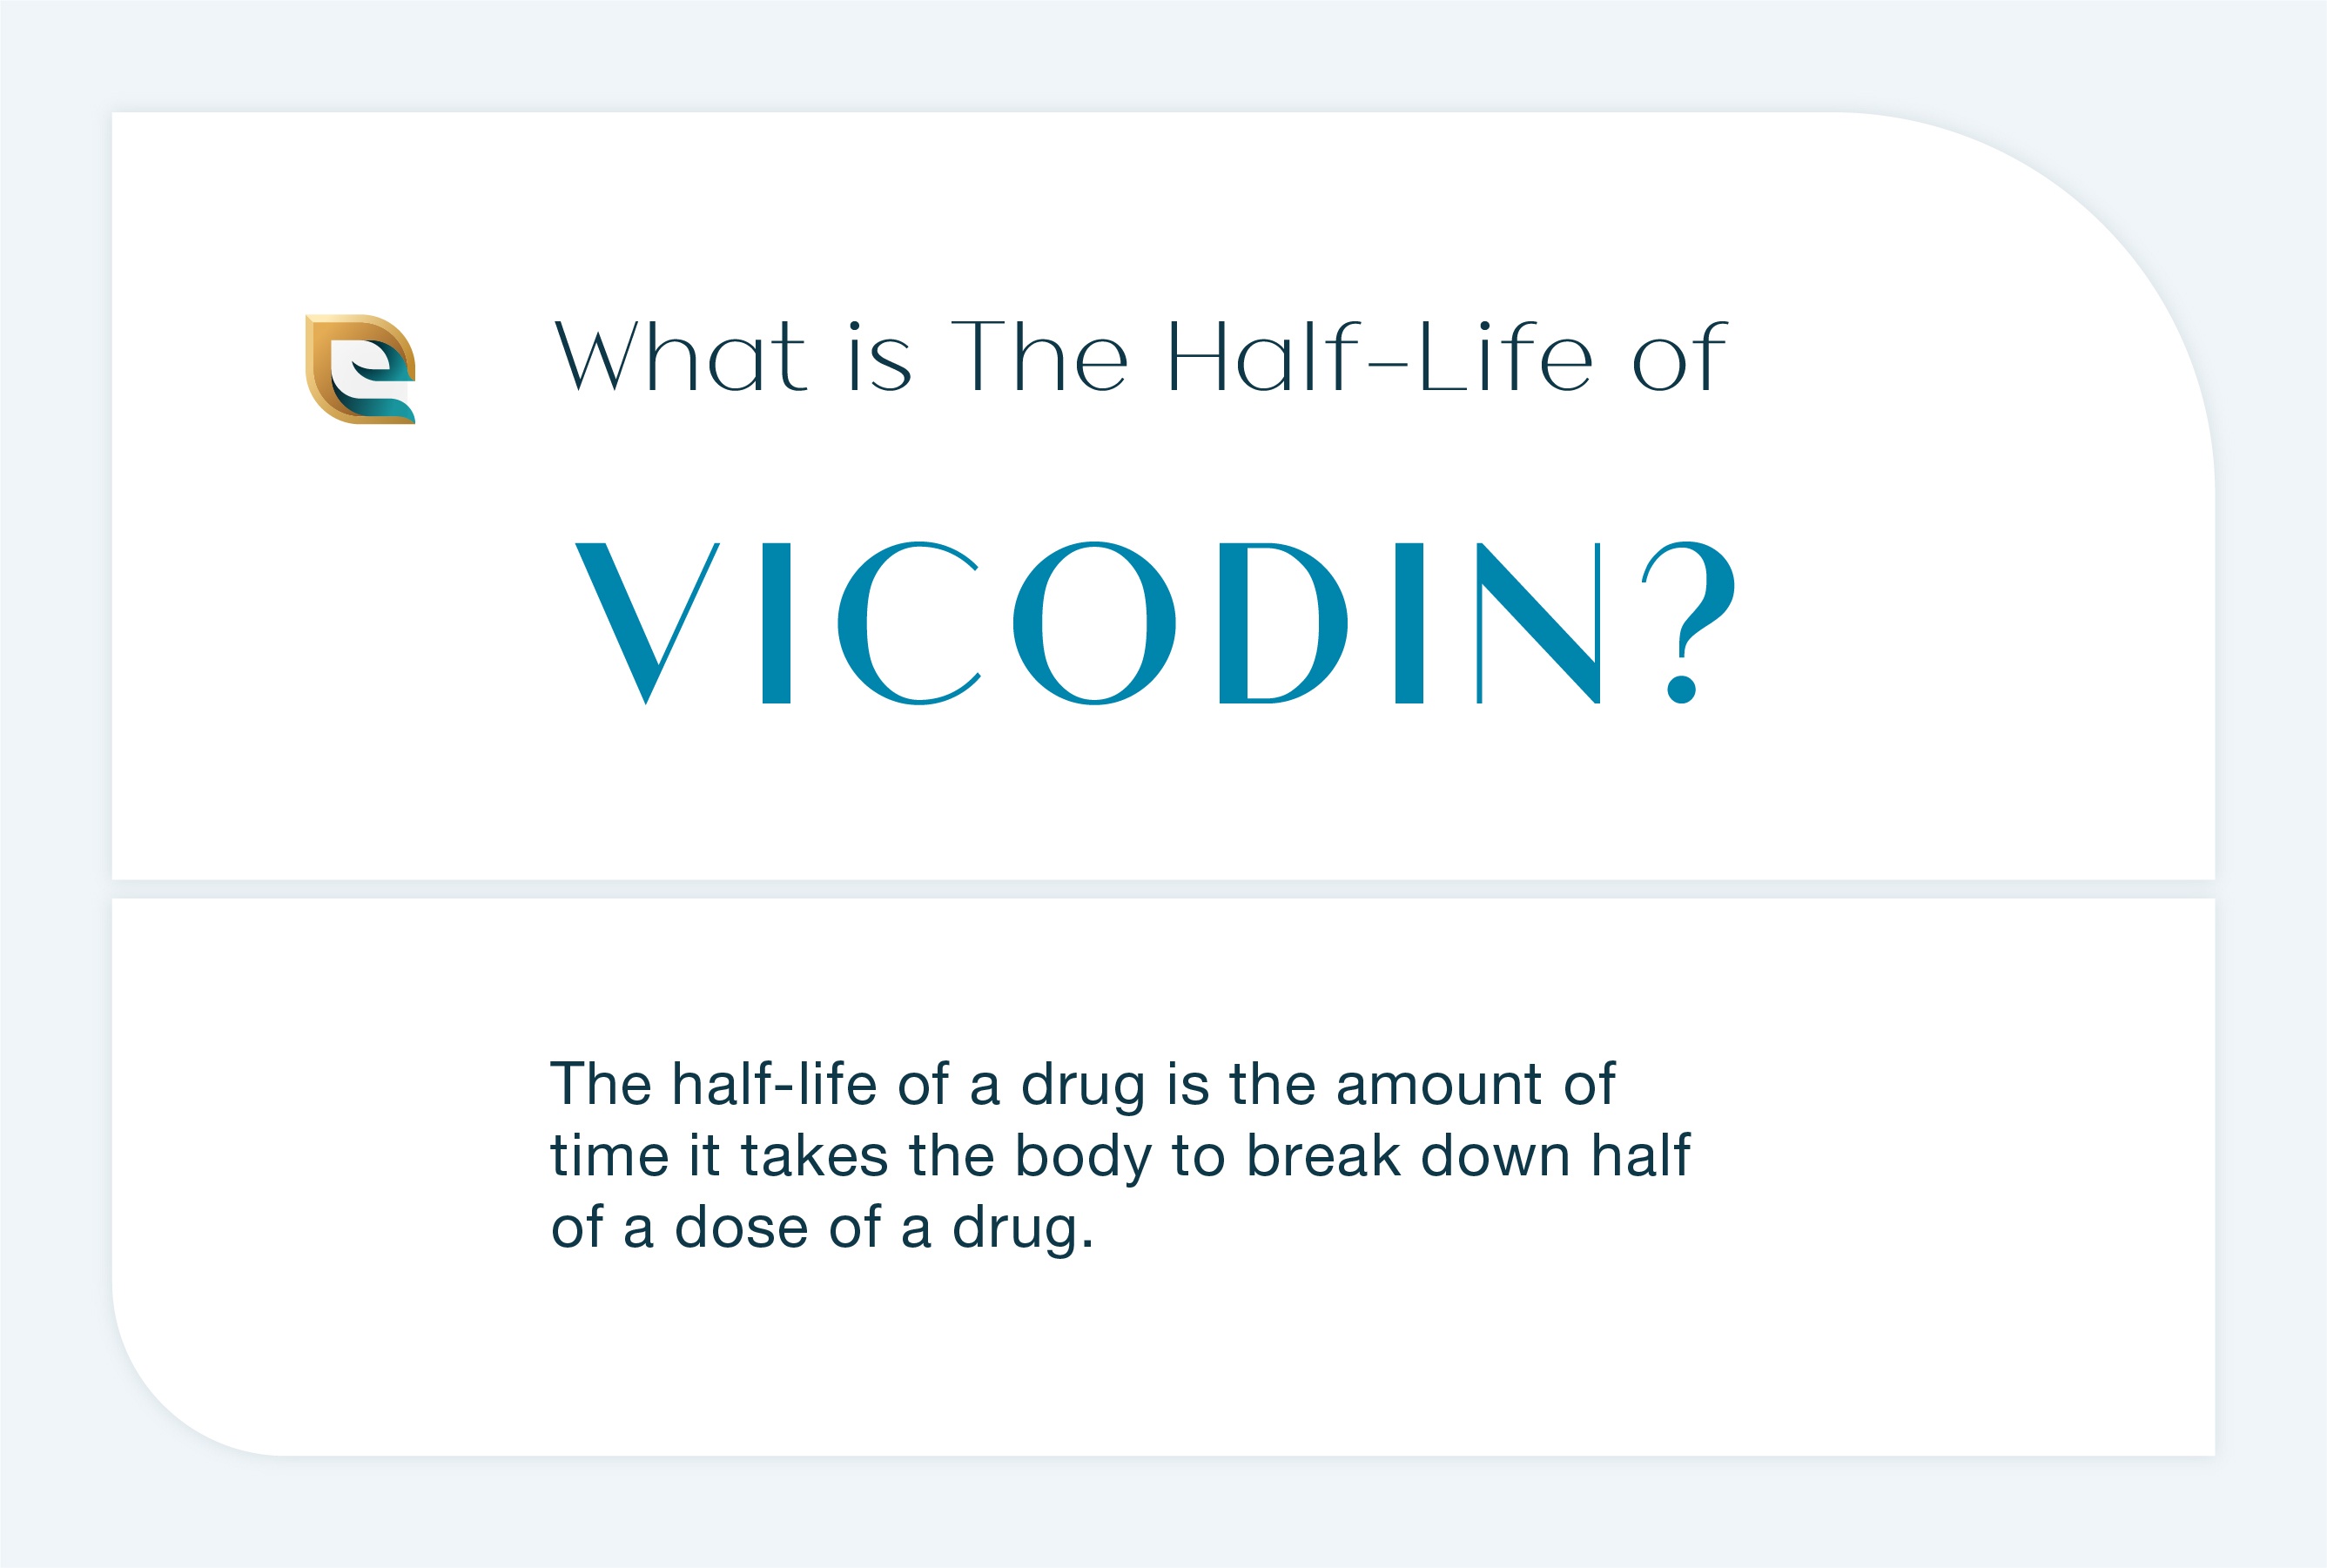 What is the half life of Vicodin? This image describes the half life of Vicodin